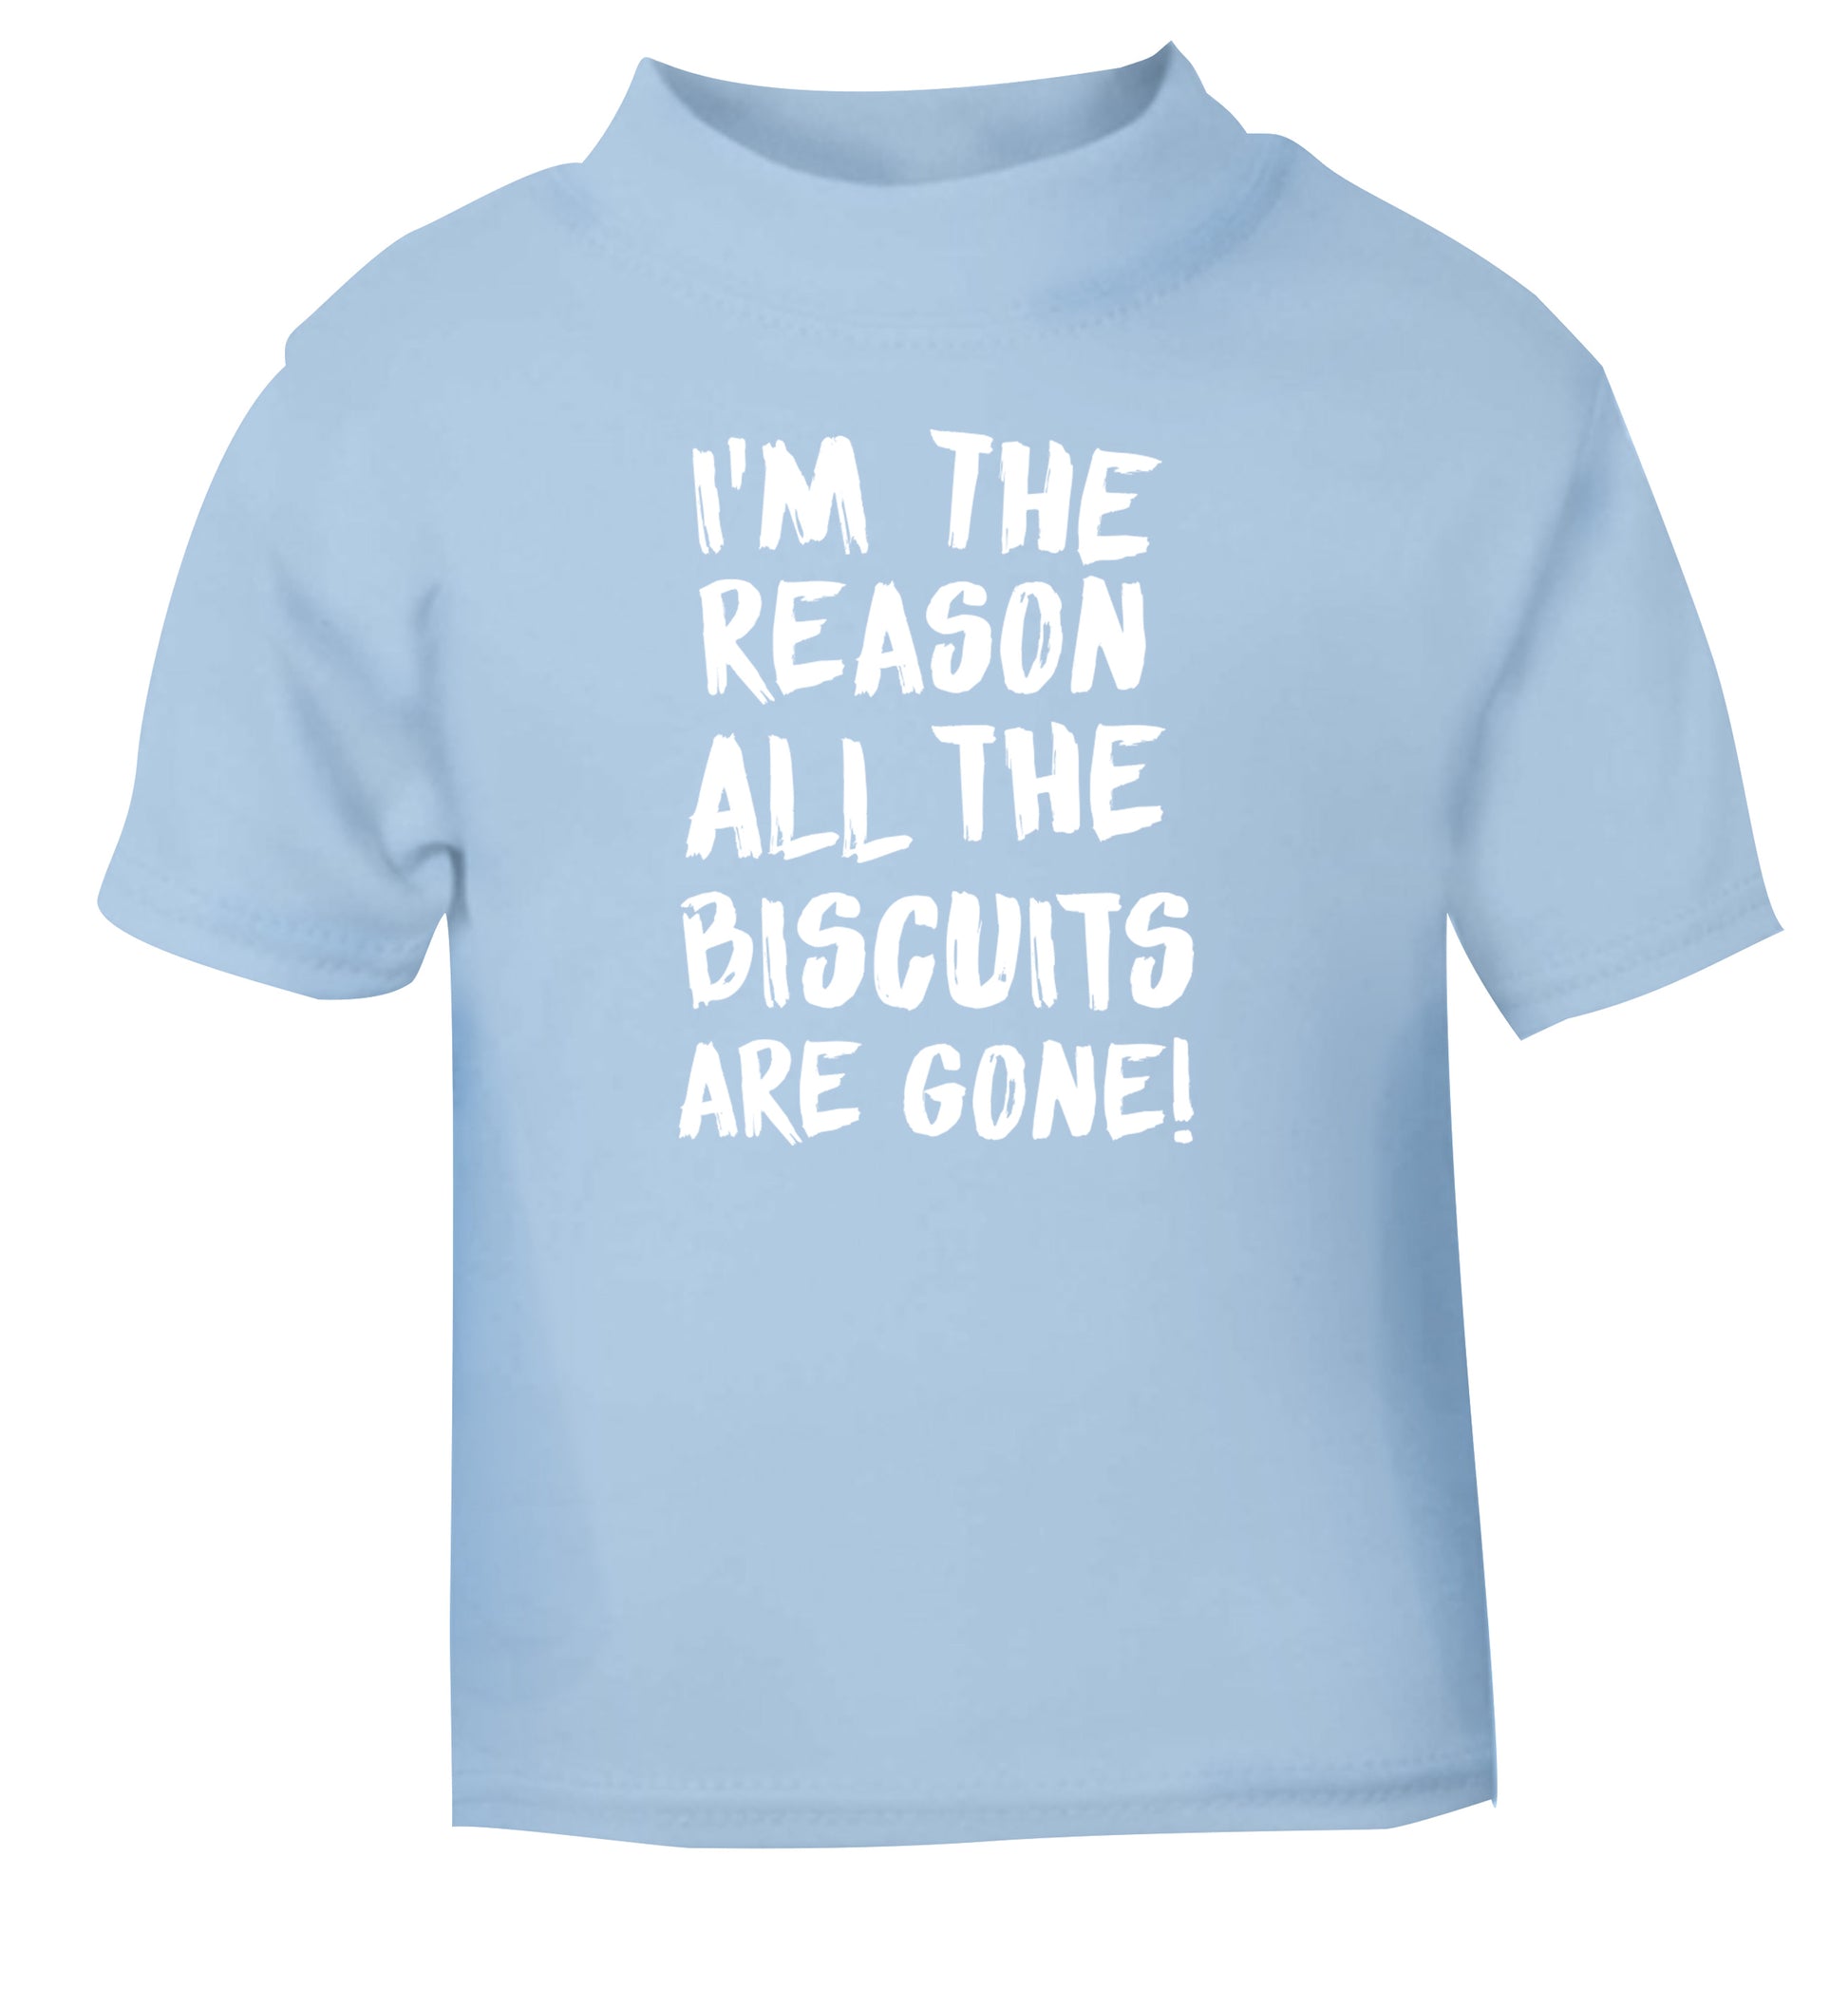 I'm the reason why all the biscuits are gone light blue Baby Toddler Tshirt 2 Years